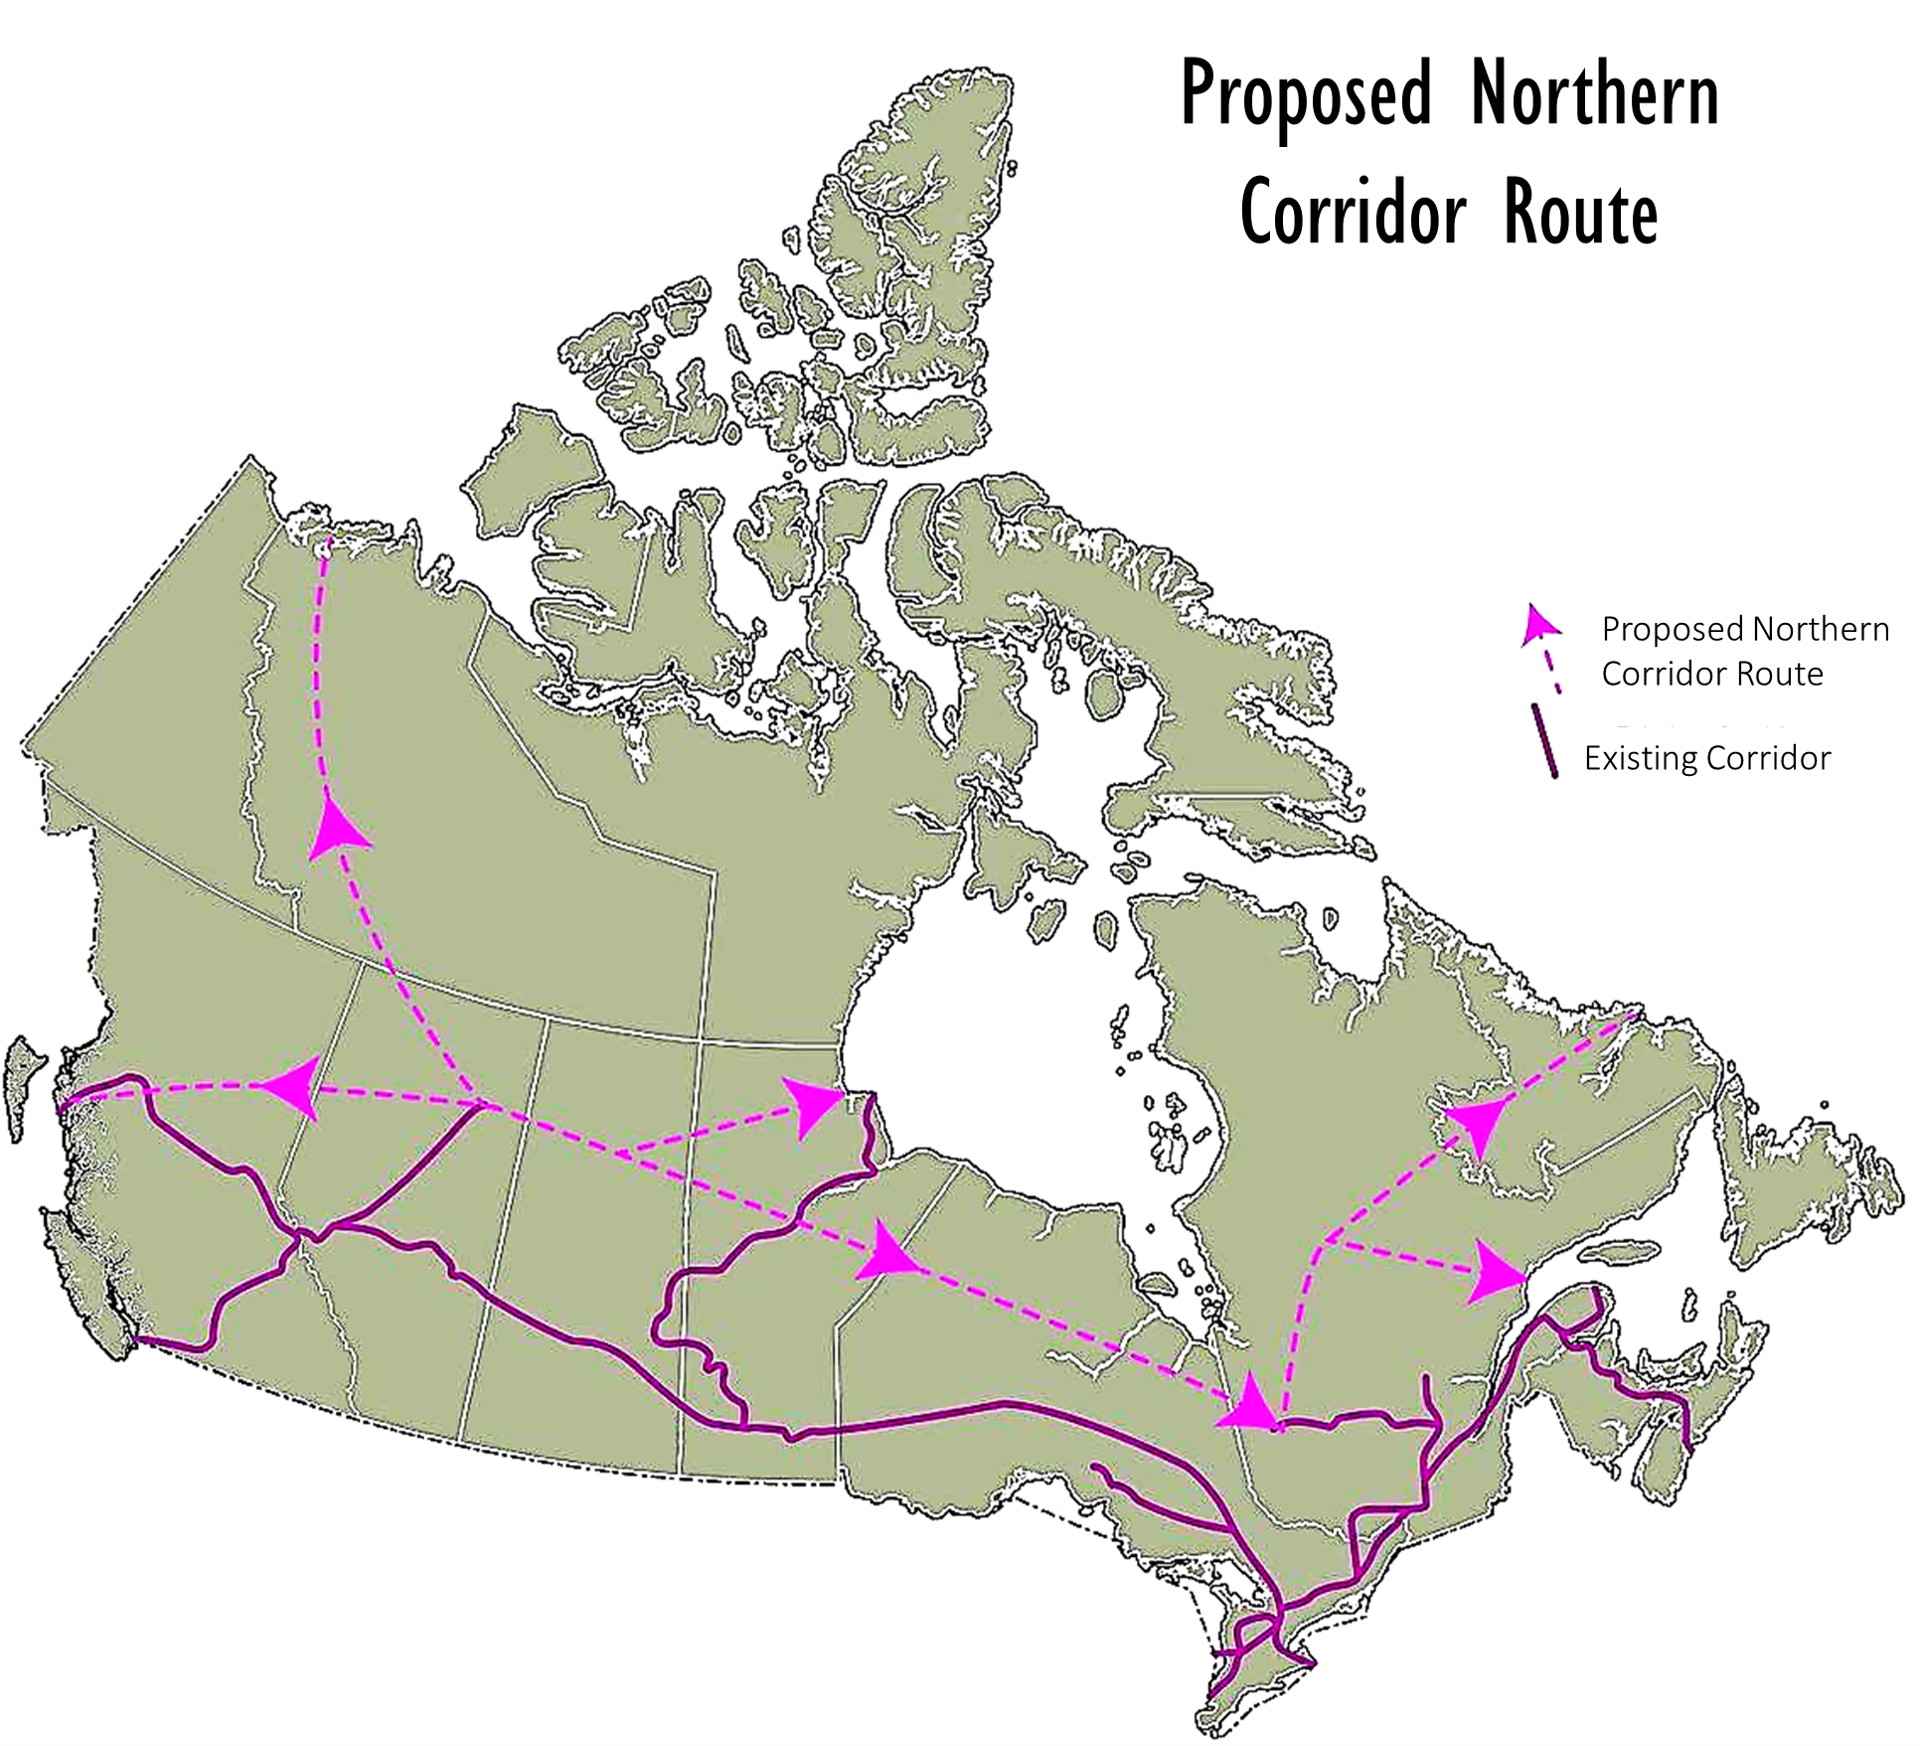 The map shows the propose routed roughly parallel to the exiting TransCanada highway, but significantly further north. It does meet up with the existing highway in Prince Rupert, and at other points. Spurs shoot off to Inuvik in the Northwest Territories, to Churchill in Manitoba, to Rigolet in Labrador, and to Sept-Iles, Quebec.